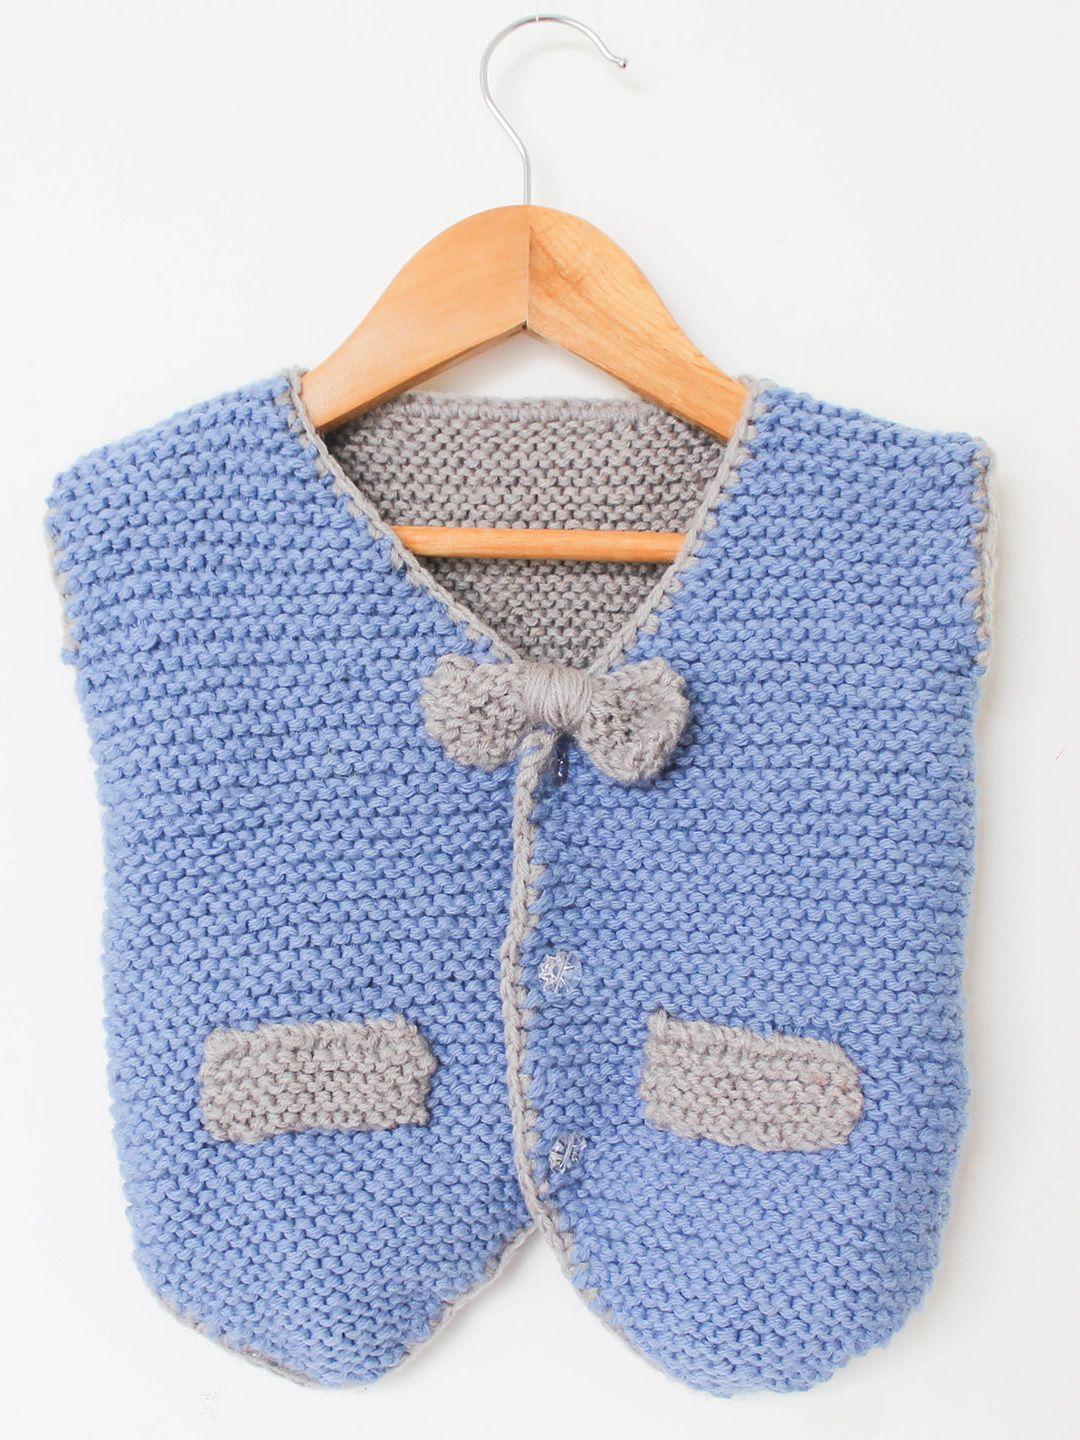 woonie unisex kids cable knit acrylic sweater vest